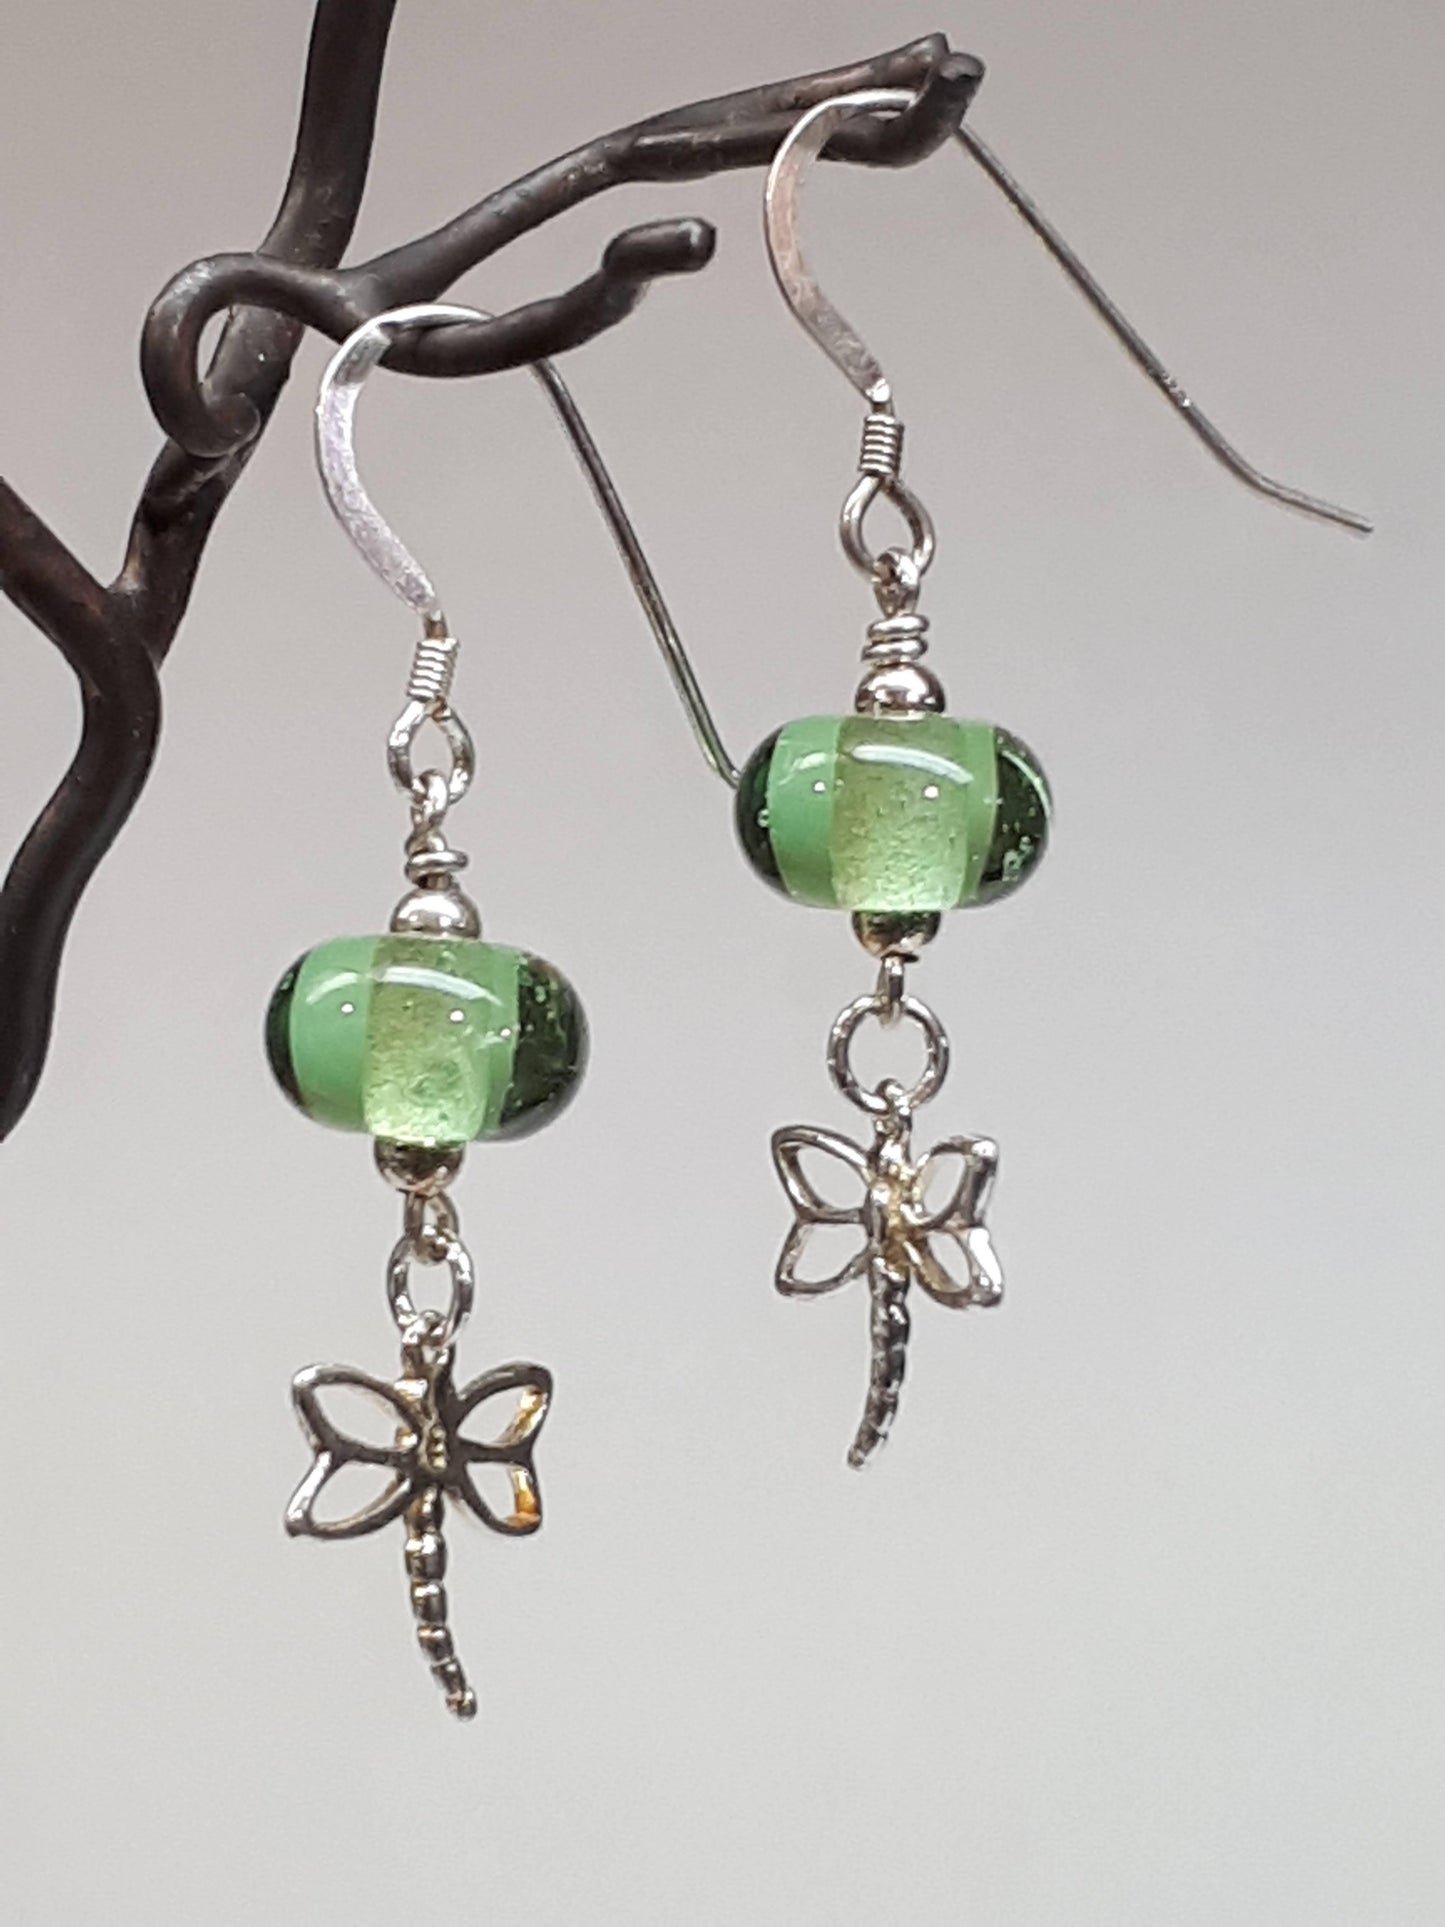 Clear Green Glass Bead Earrings Silver Dragonflies Made in Canada Hanscomb Glass